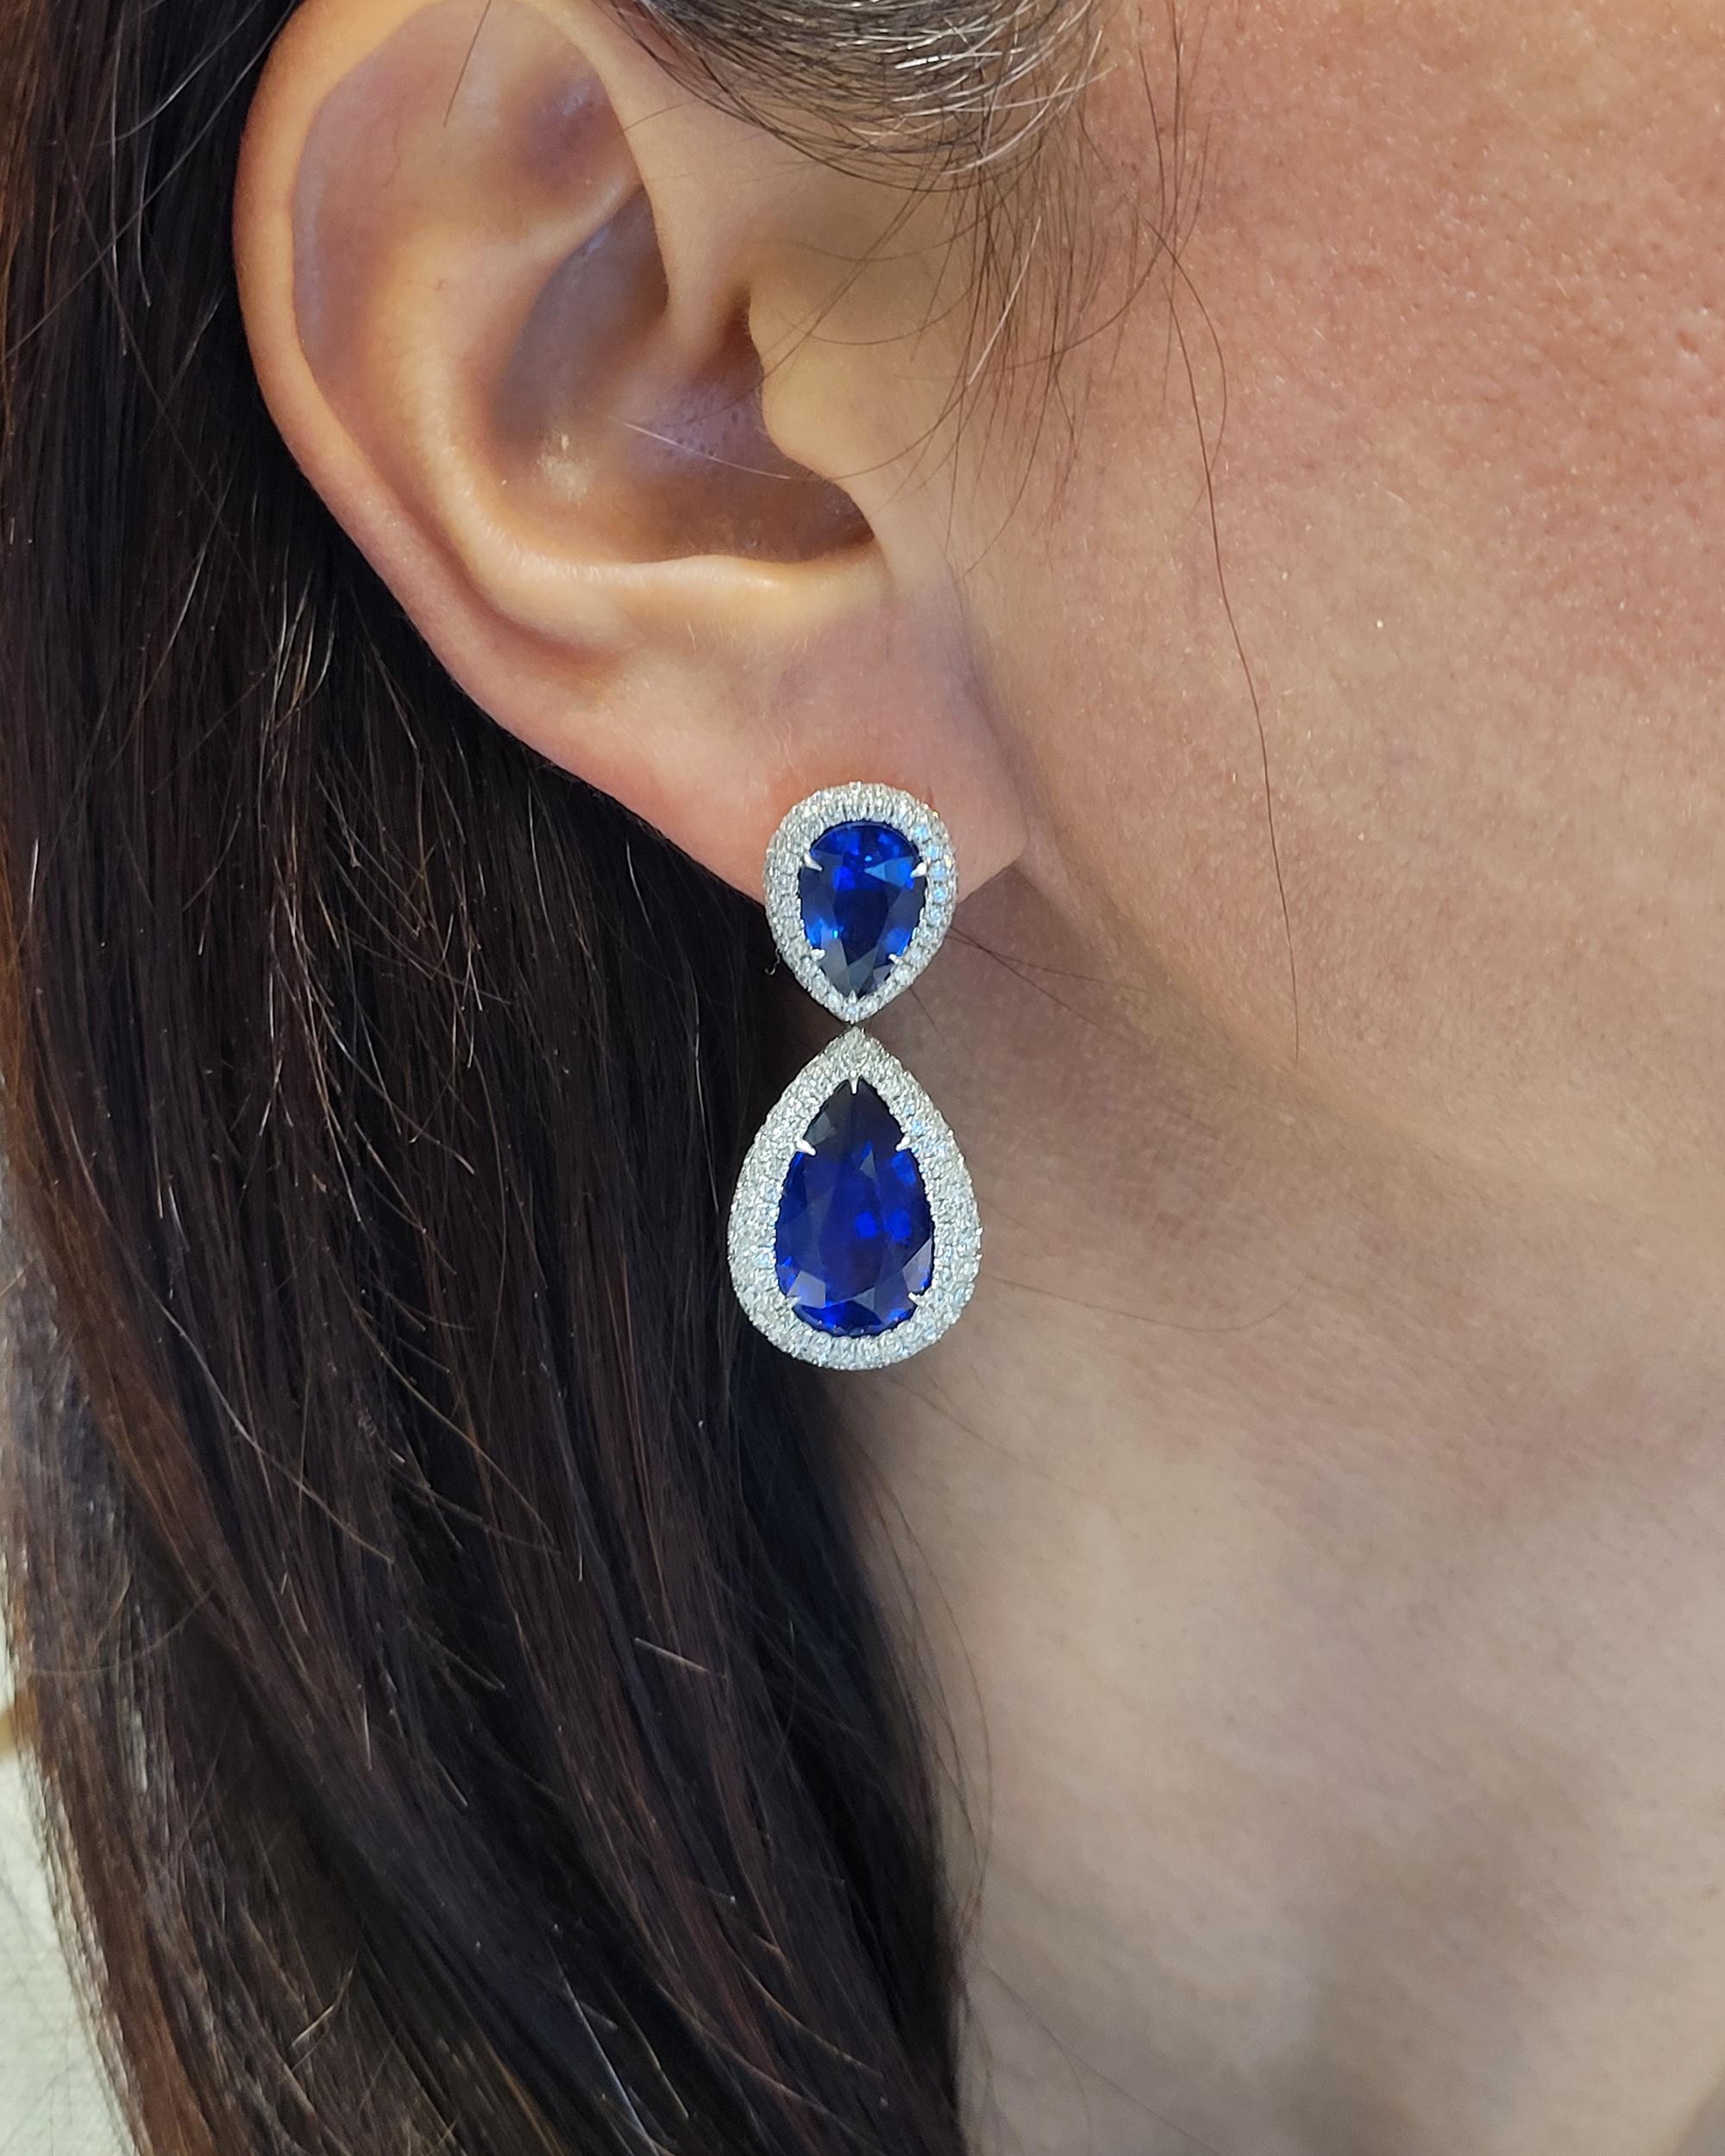 A pair of drop earrings comprising of the four pear-shape sapphires and diamonds. by Spectra Fine Jewelry.
Total weight of the sapphires is 28.52 carats. Weight breakdown:
two smaller top sapphires are 4.12 & 4.37 carats.
Two bigger sapphires on the